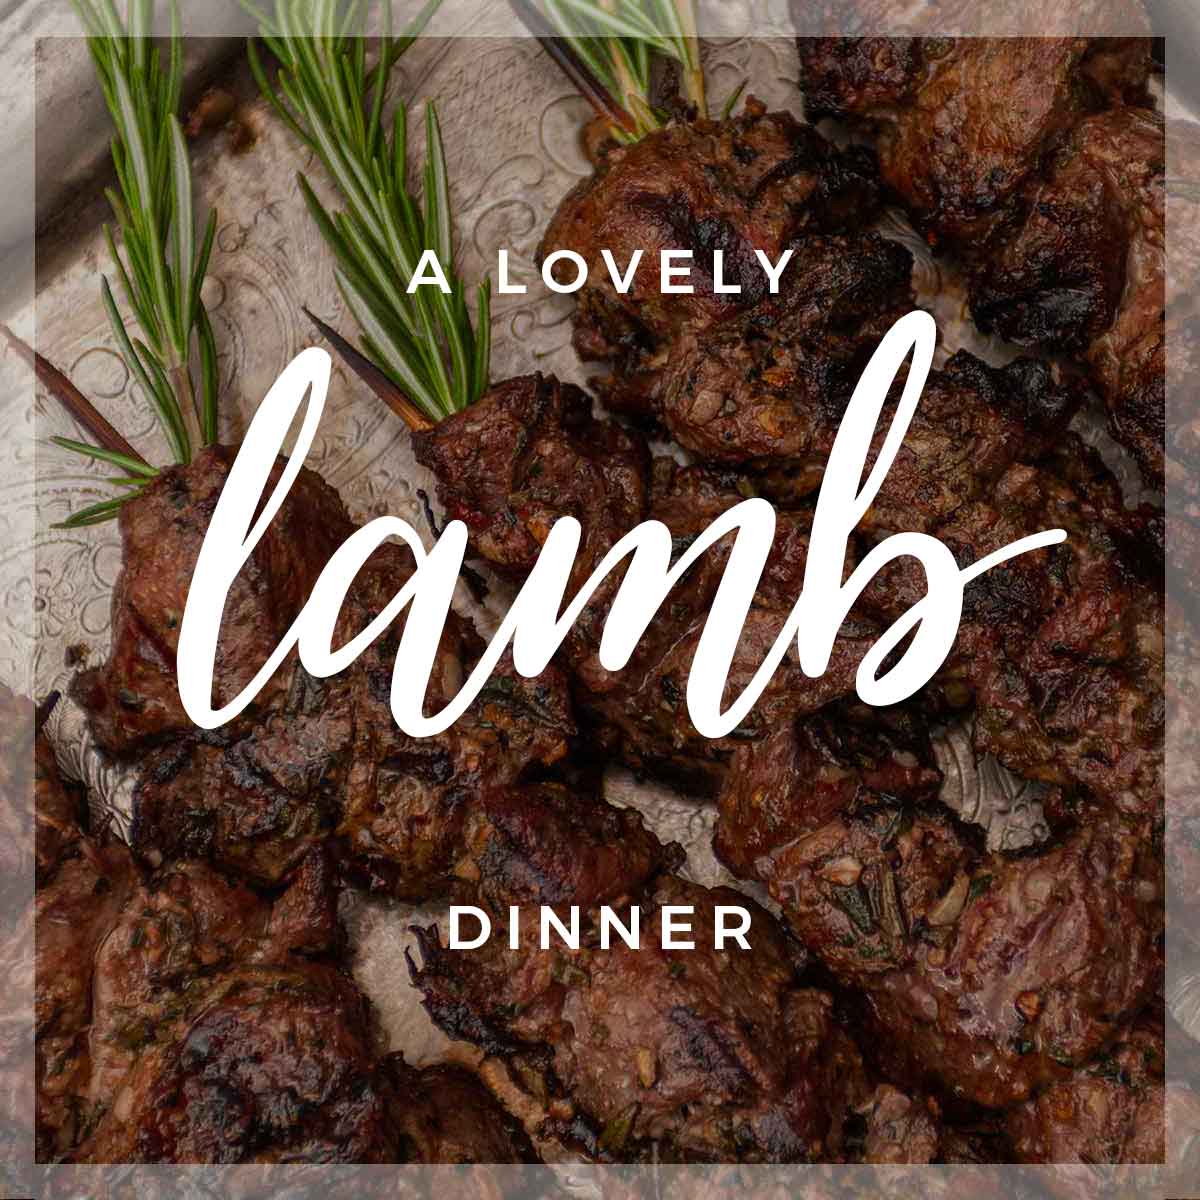 5 lamb skewers on a platter with a title that says "A Lovely Lamb Dinner."